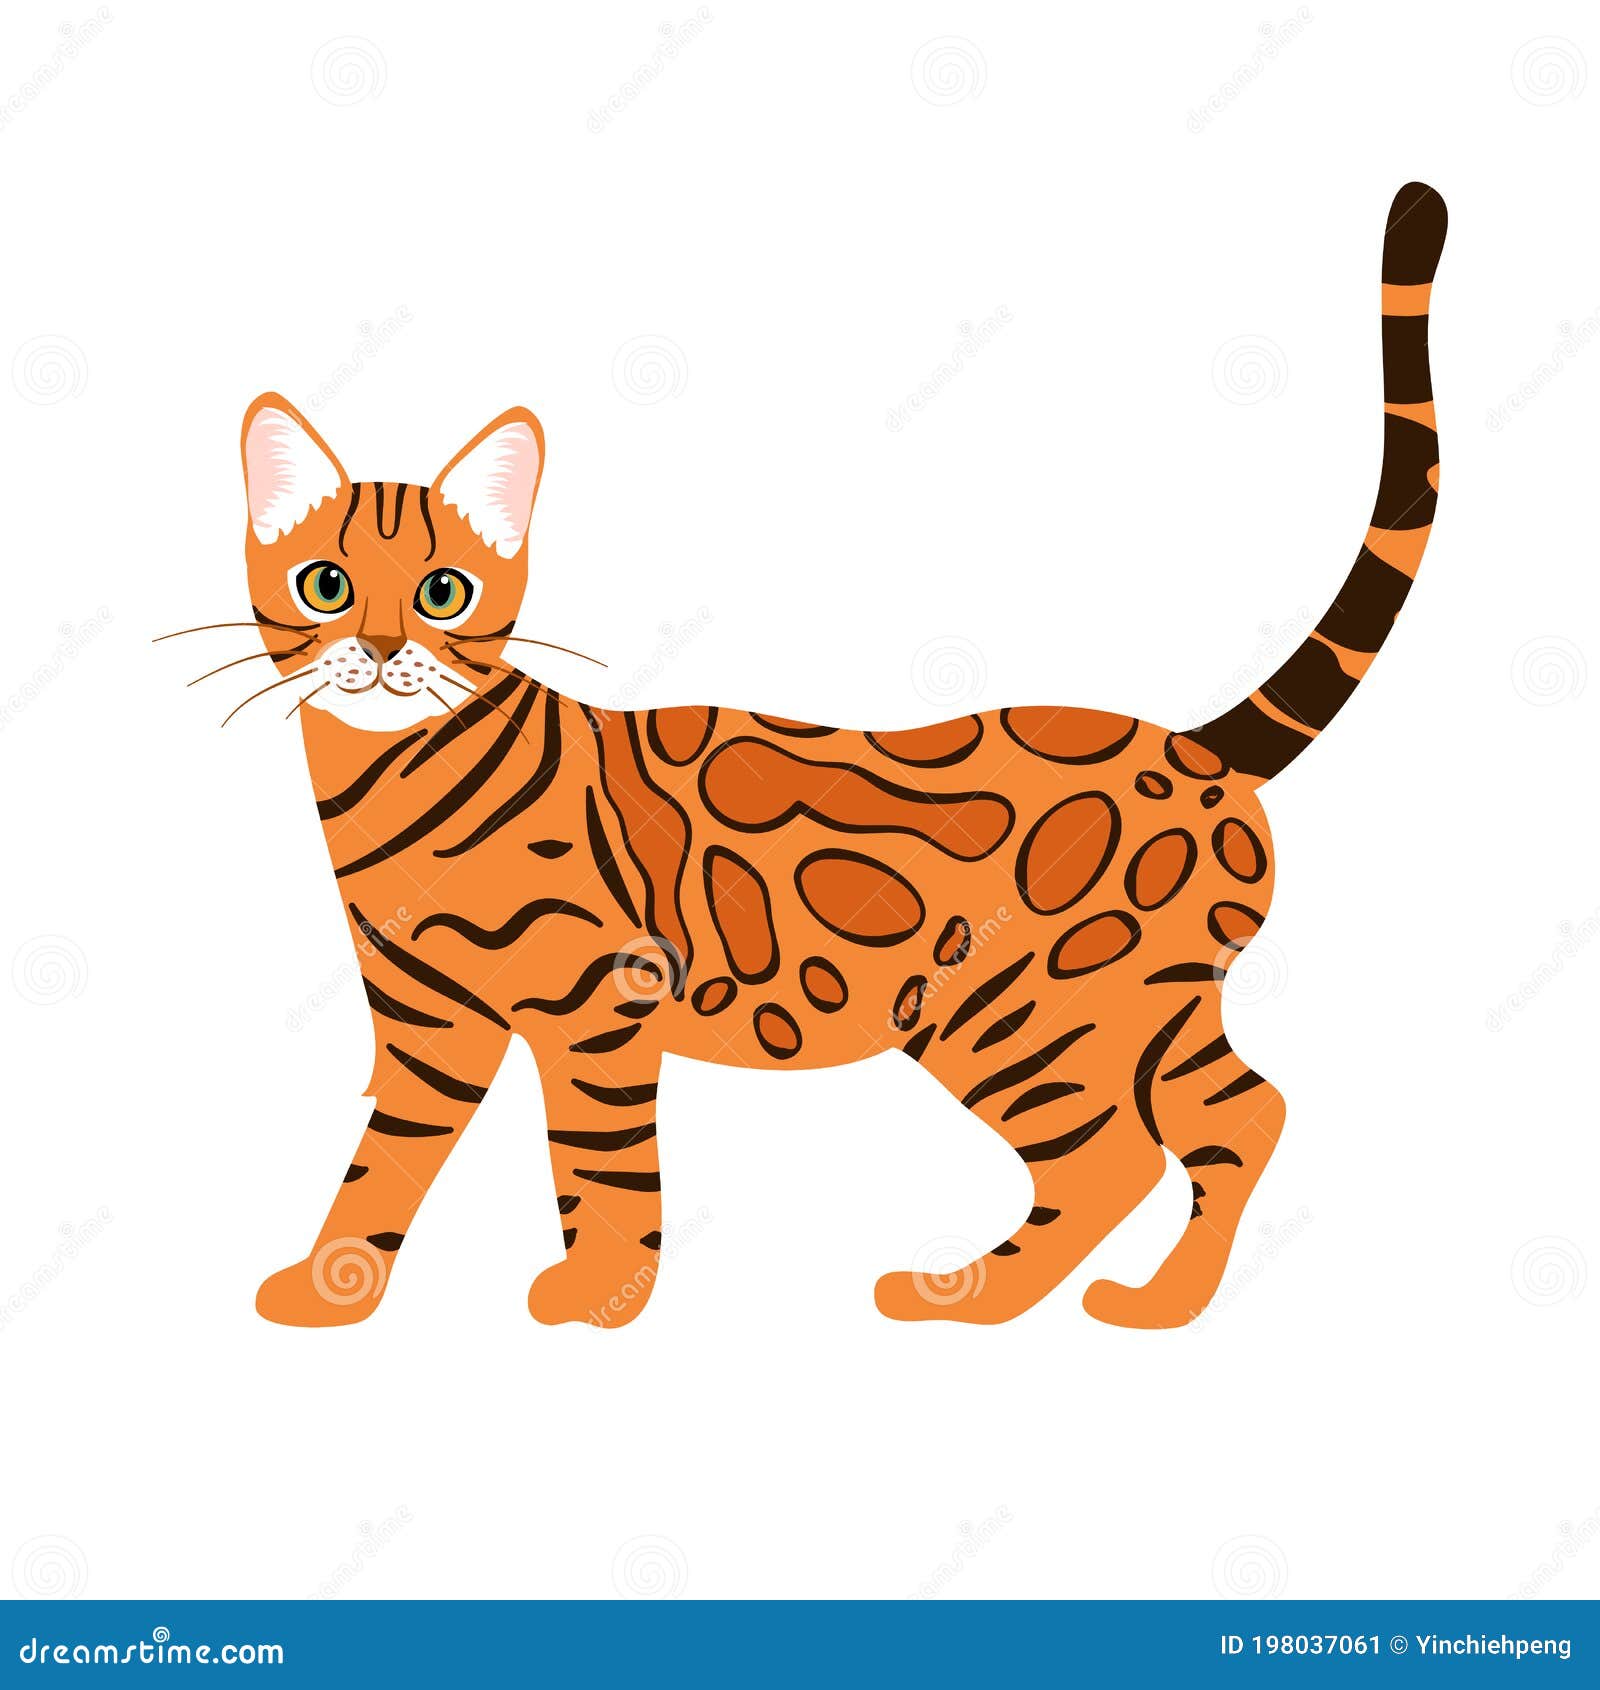 How to Draw a Cat (Bengal)